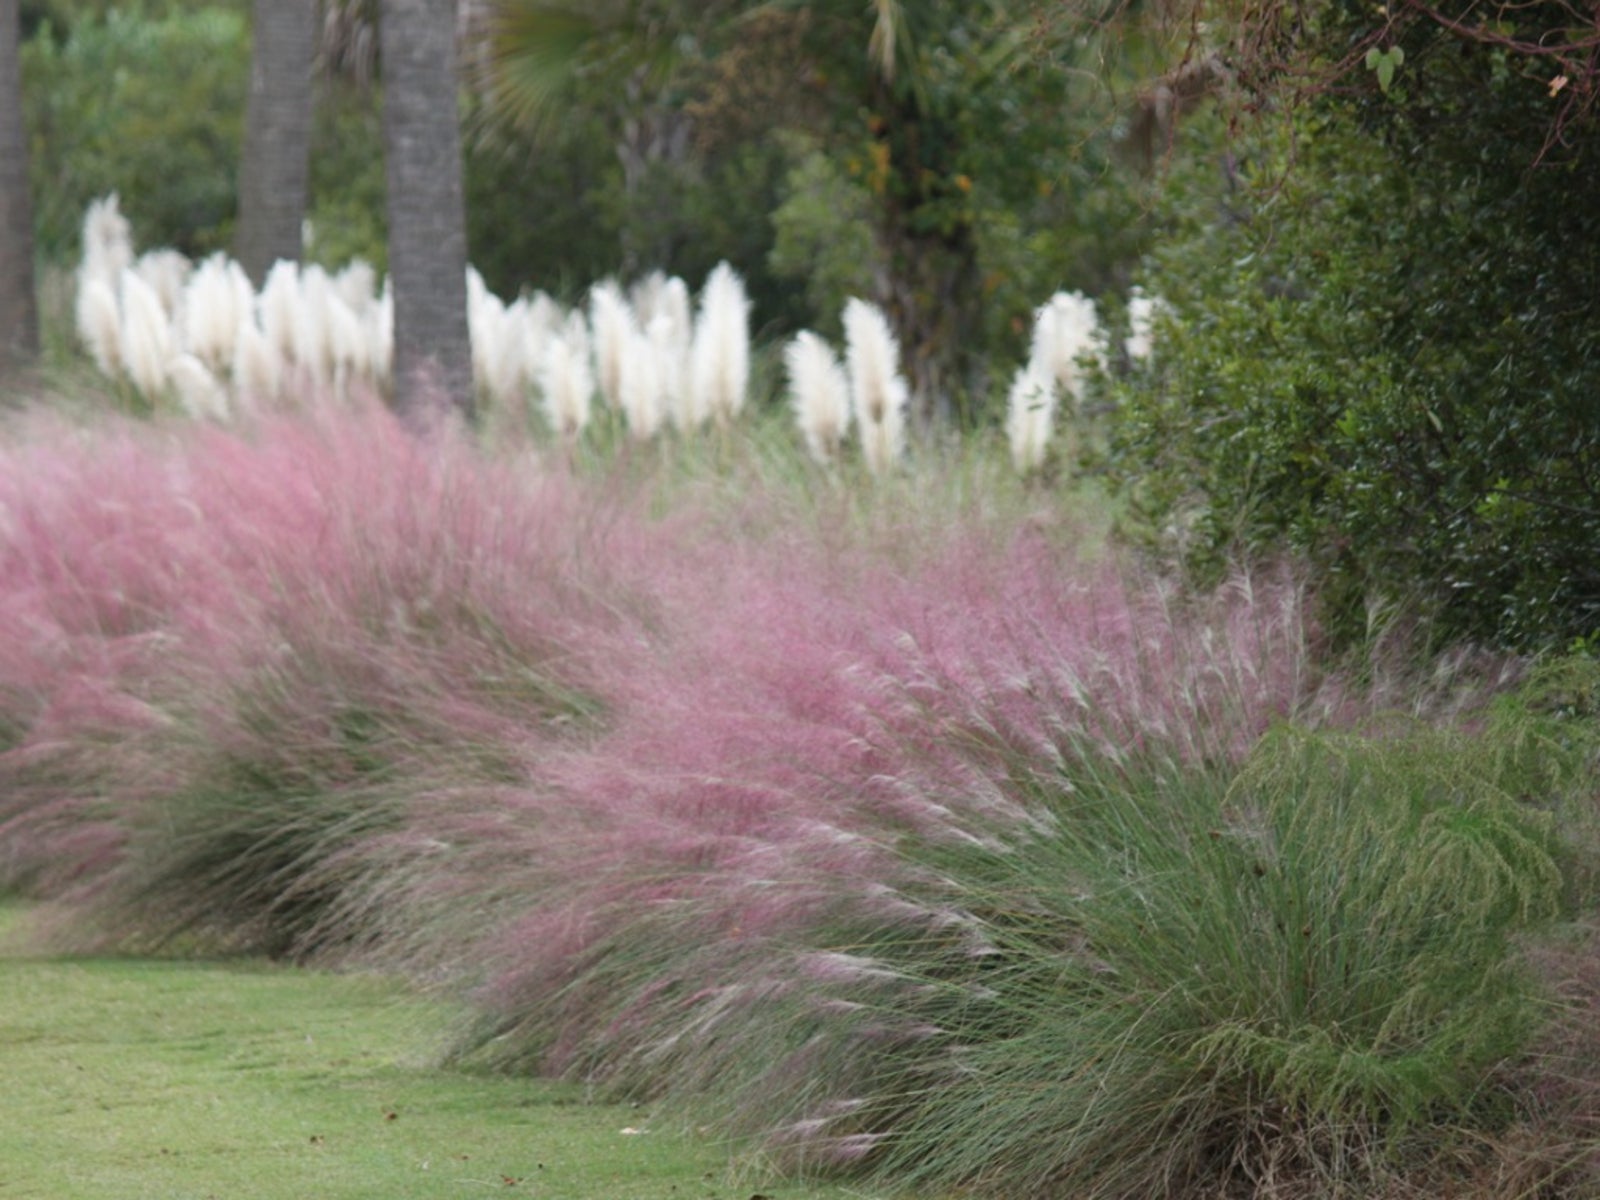 growing ornamental grasses learn more about ornamental grass in